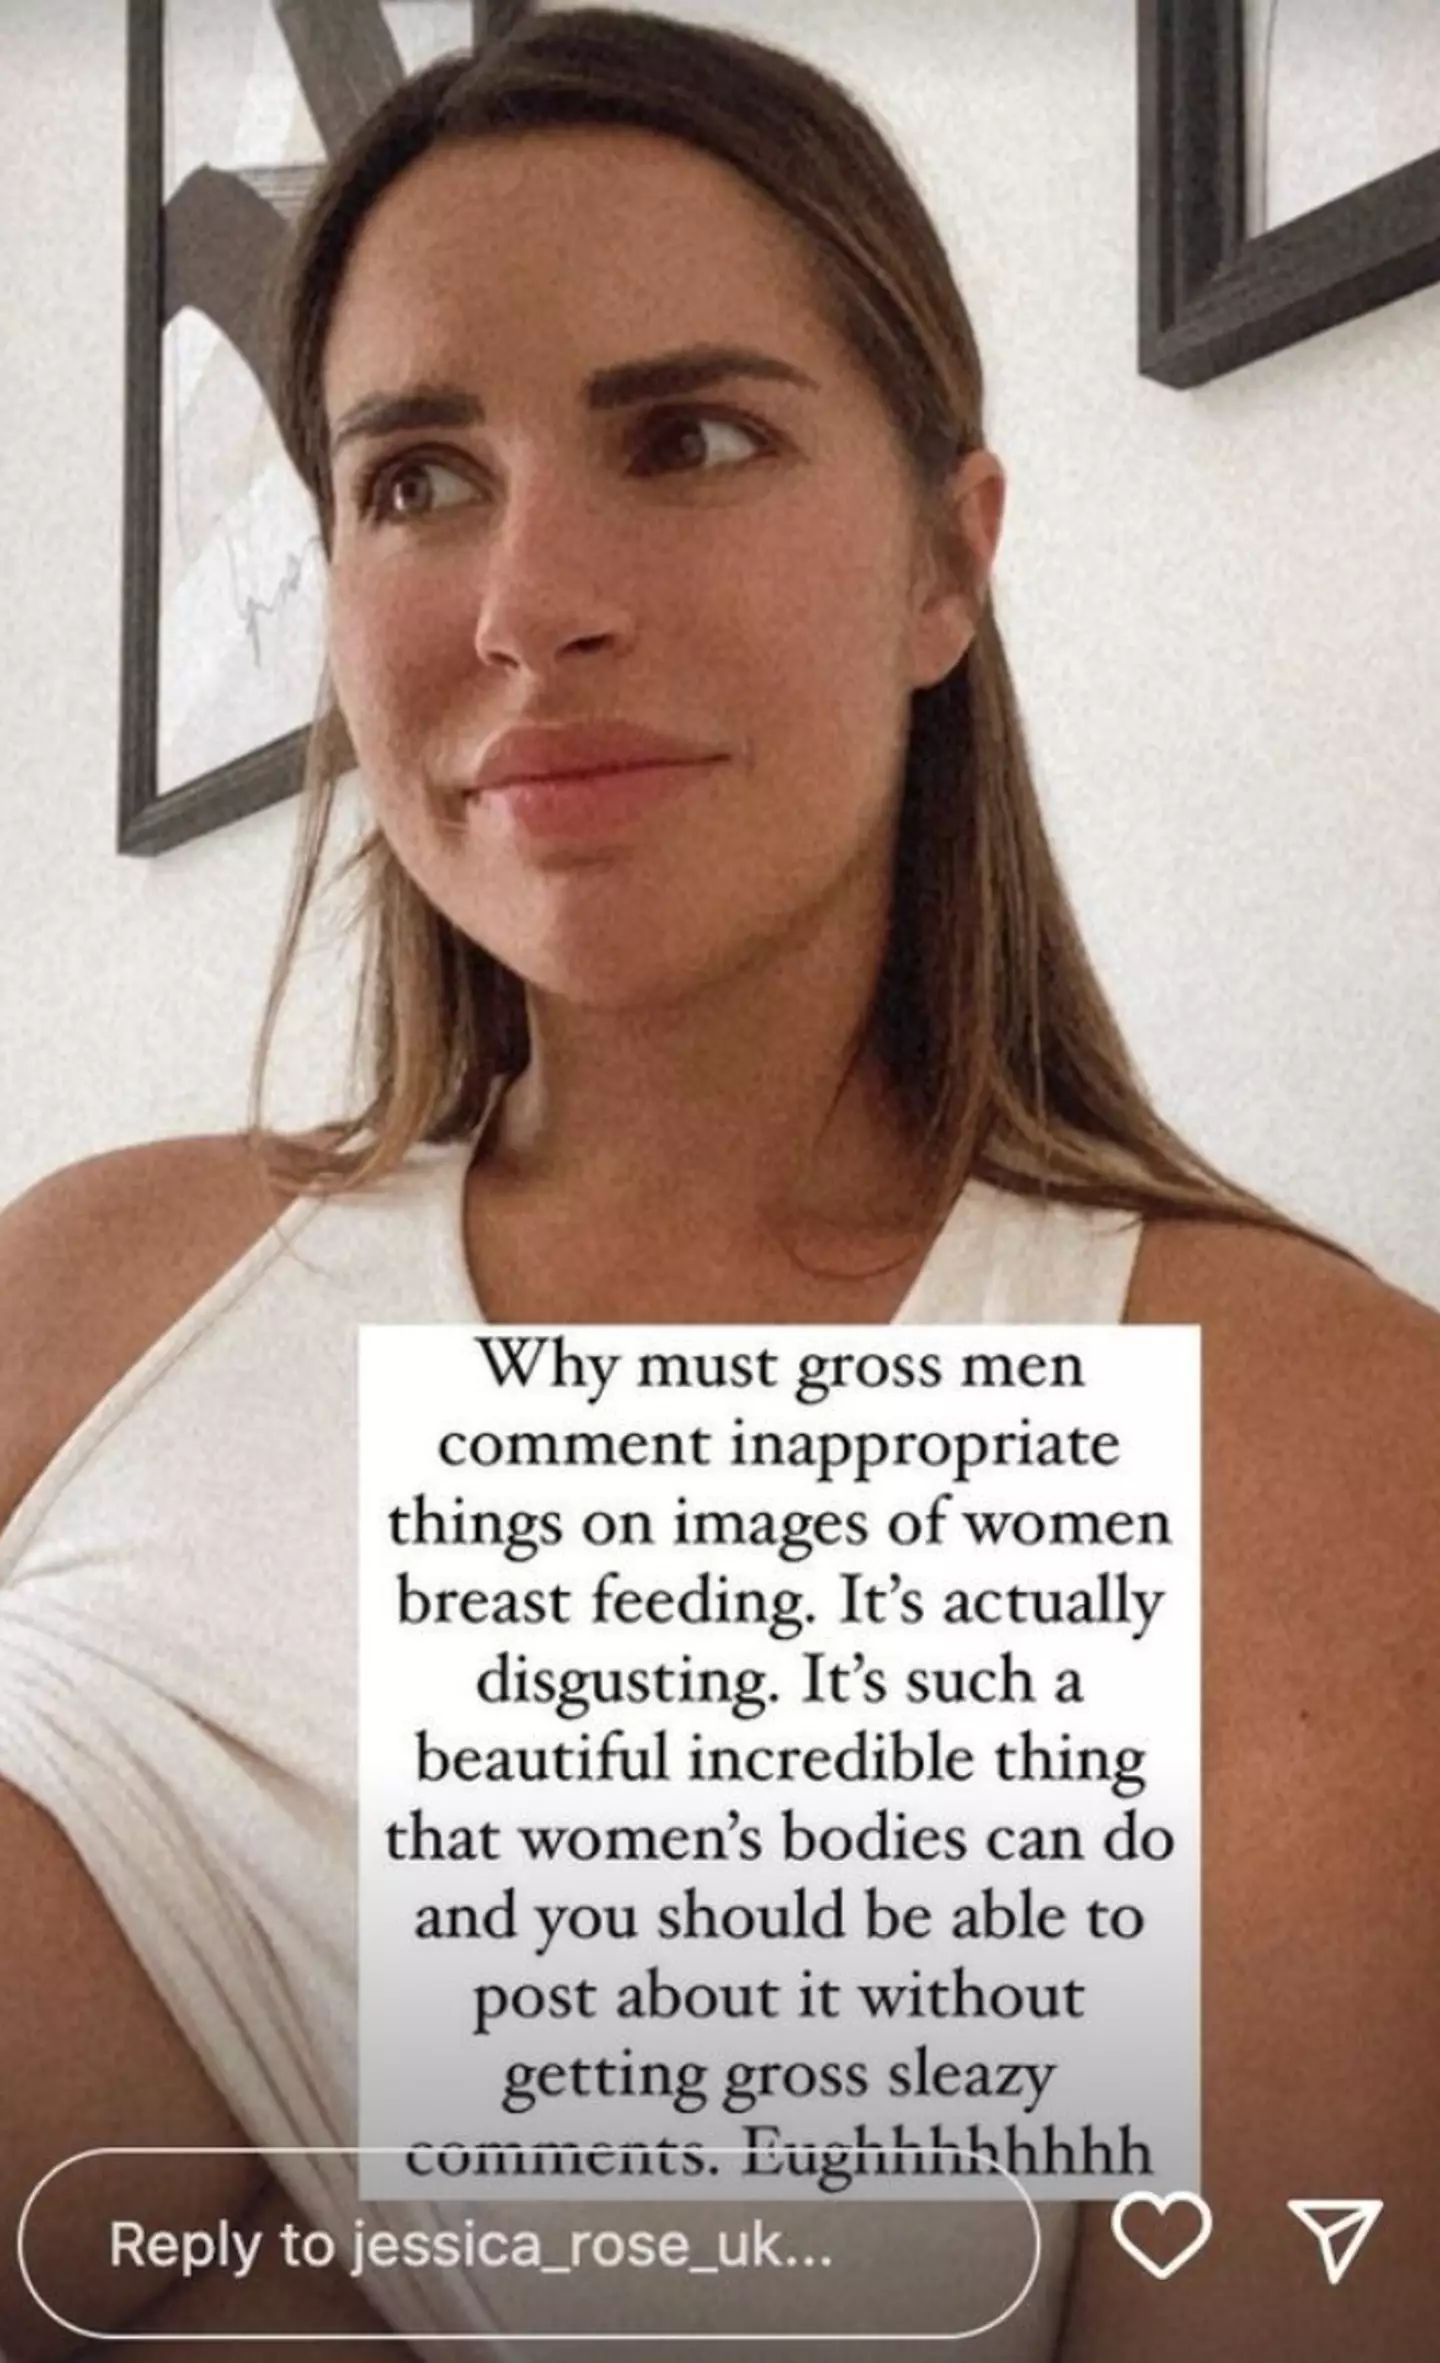 Jess took to her Stories to criticise the 'gross men'.